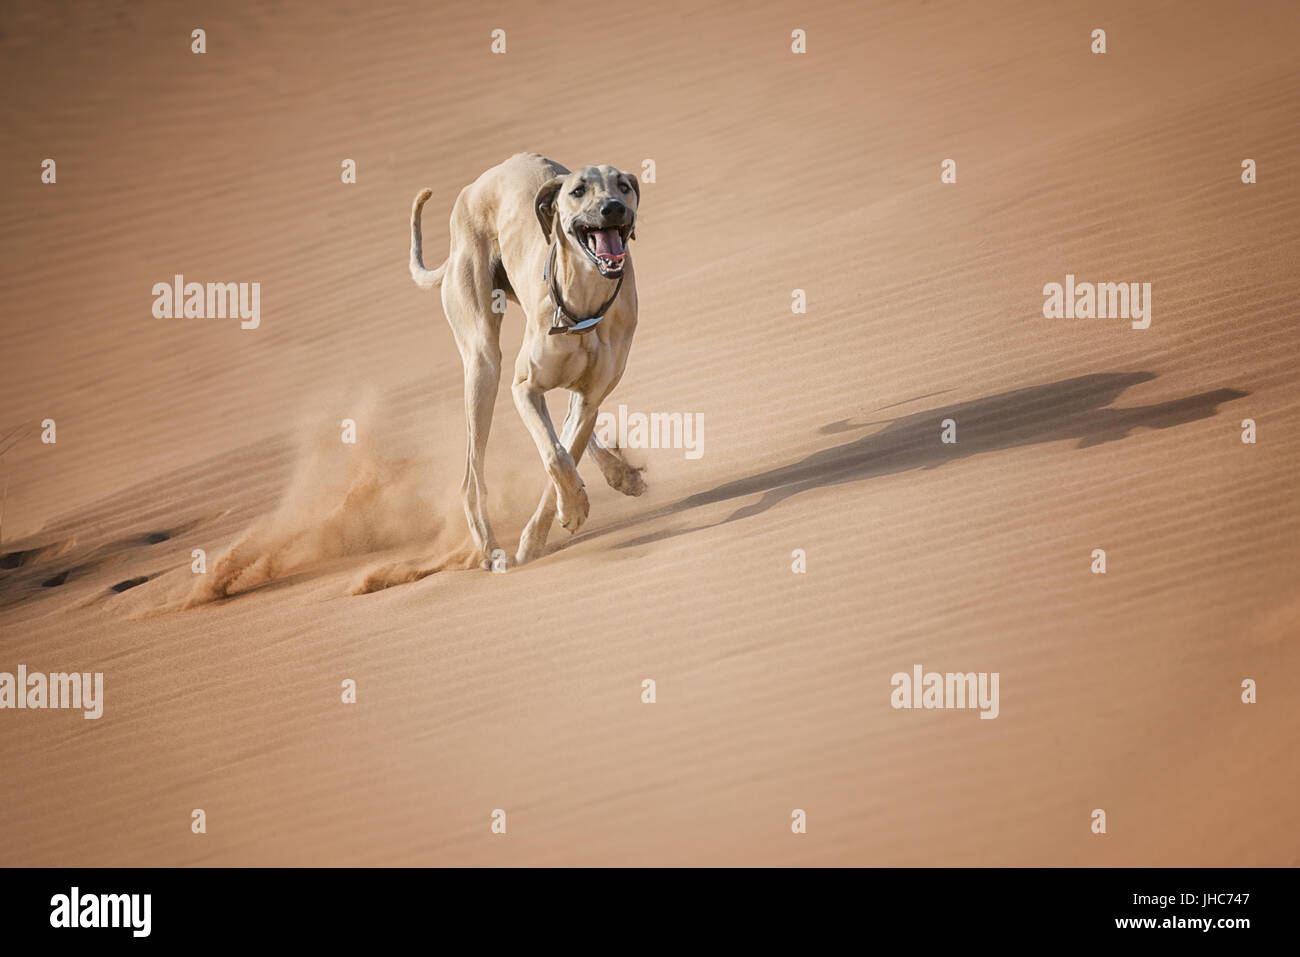 A Sloughi (Arabian greyhound) runs in the desert of Morocco. Stock Photo